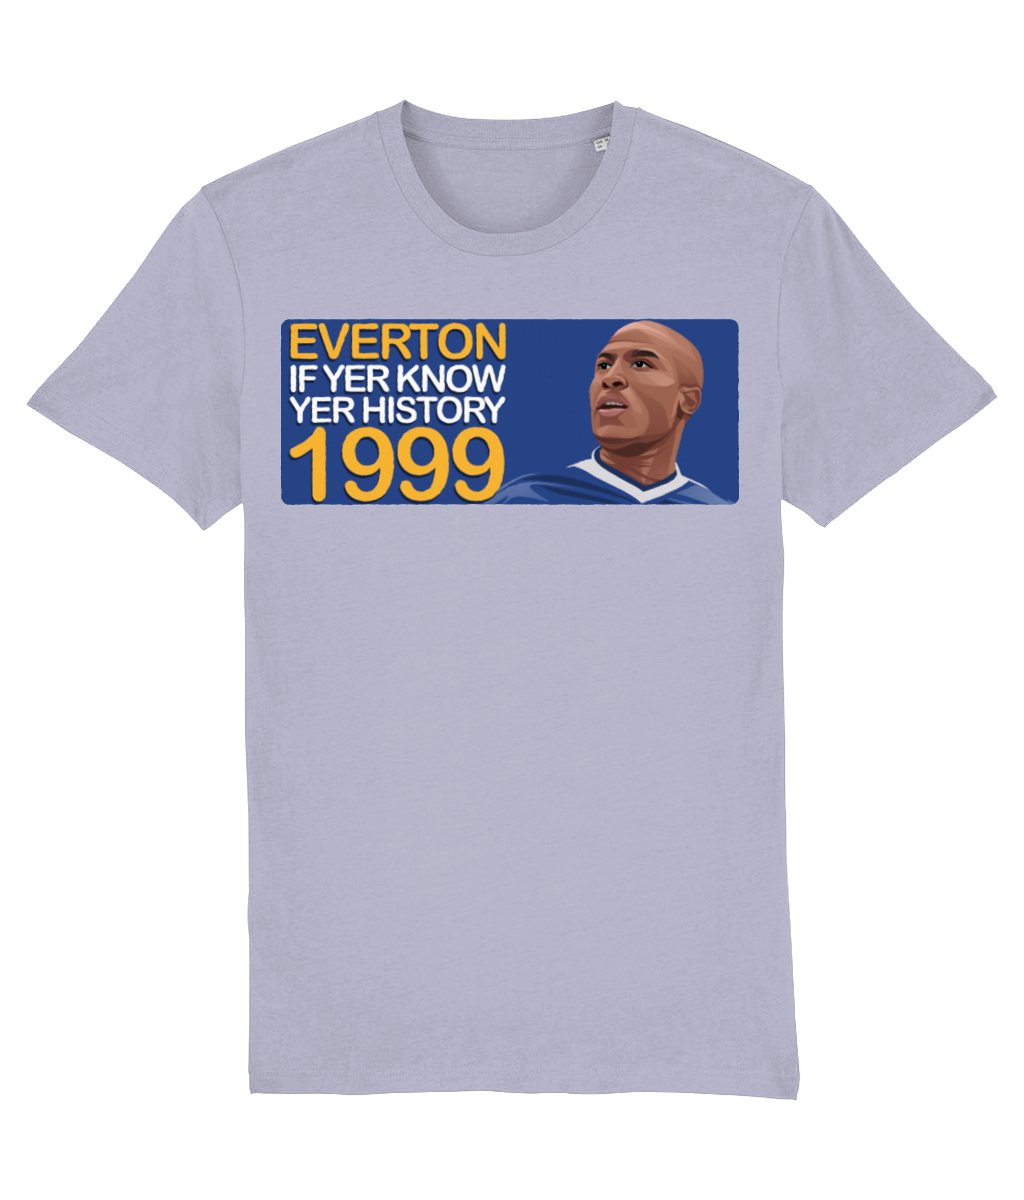 Everton 1999 Kevin Campbell If Yer Know Yer History Unisex T-Shirt Stanley/Stella Retrotext Lavender XX-Small 